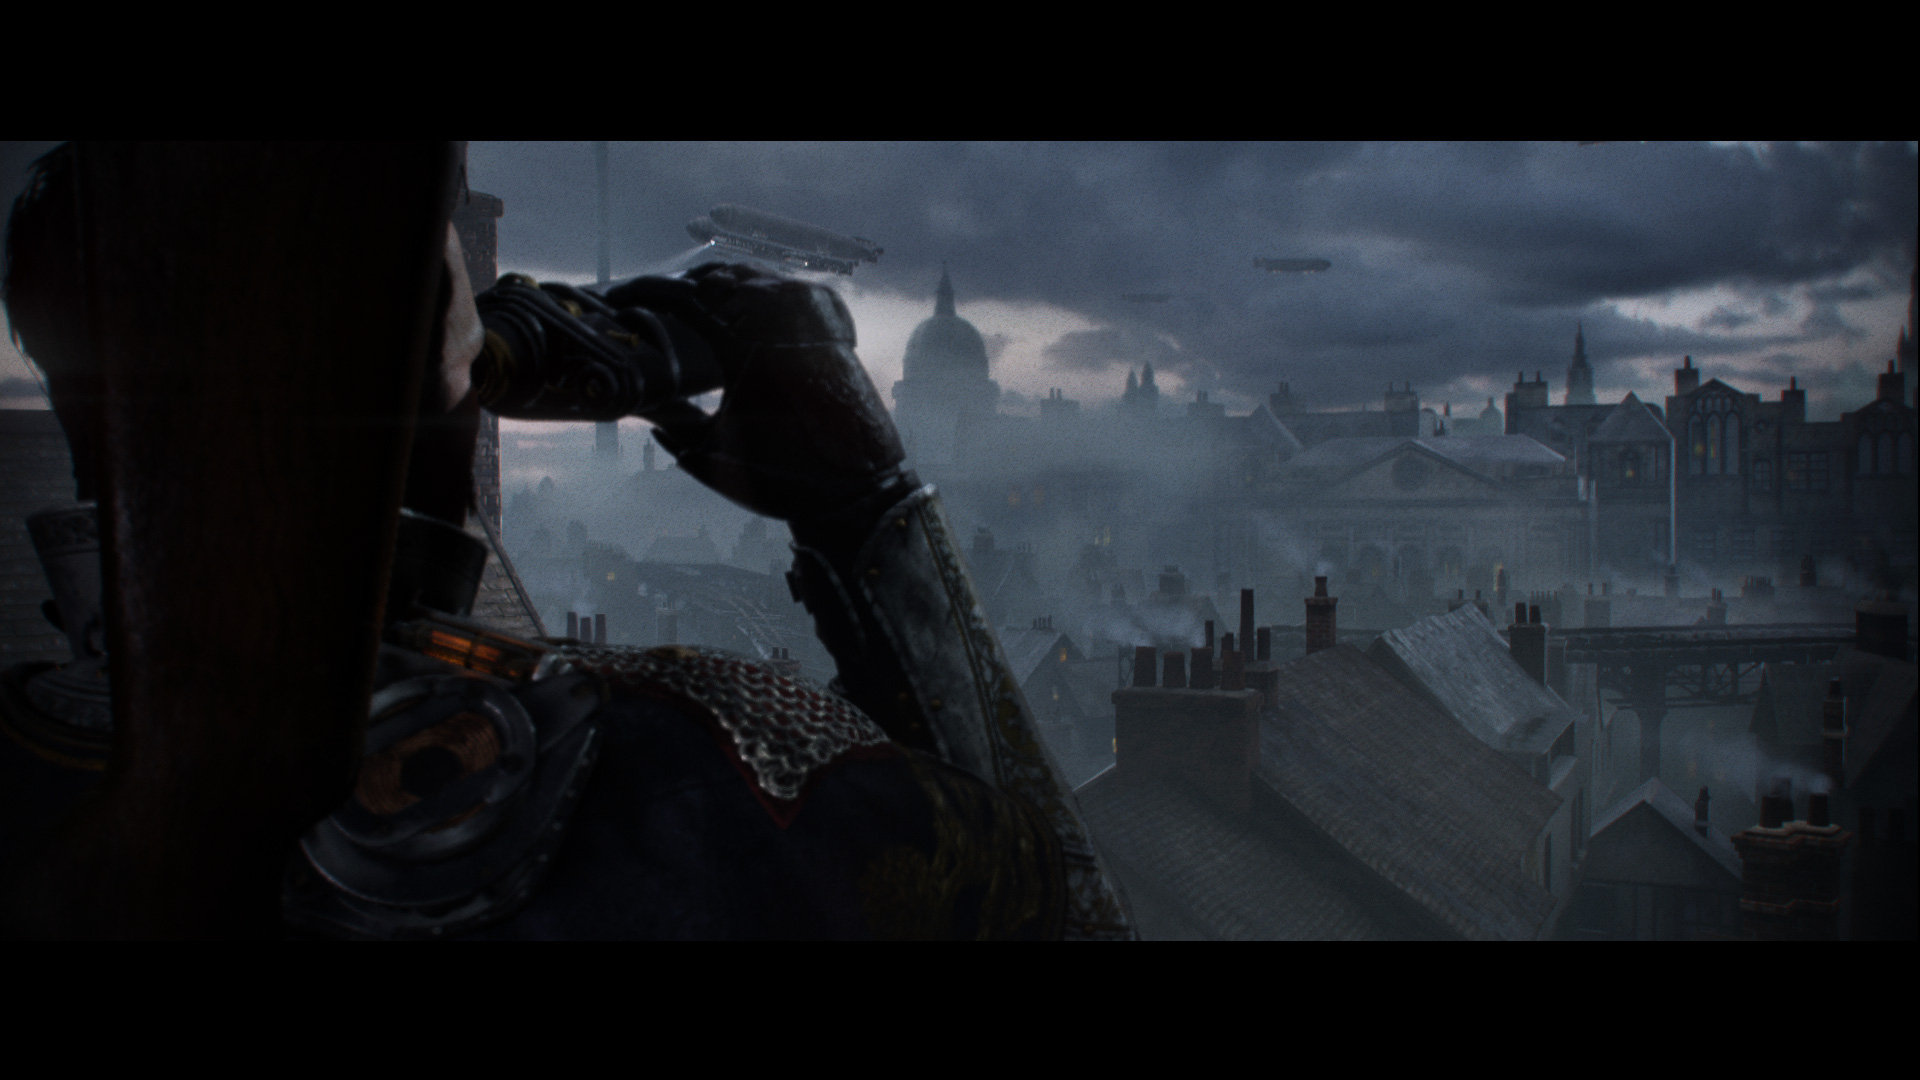 The Order: 1886 Picture